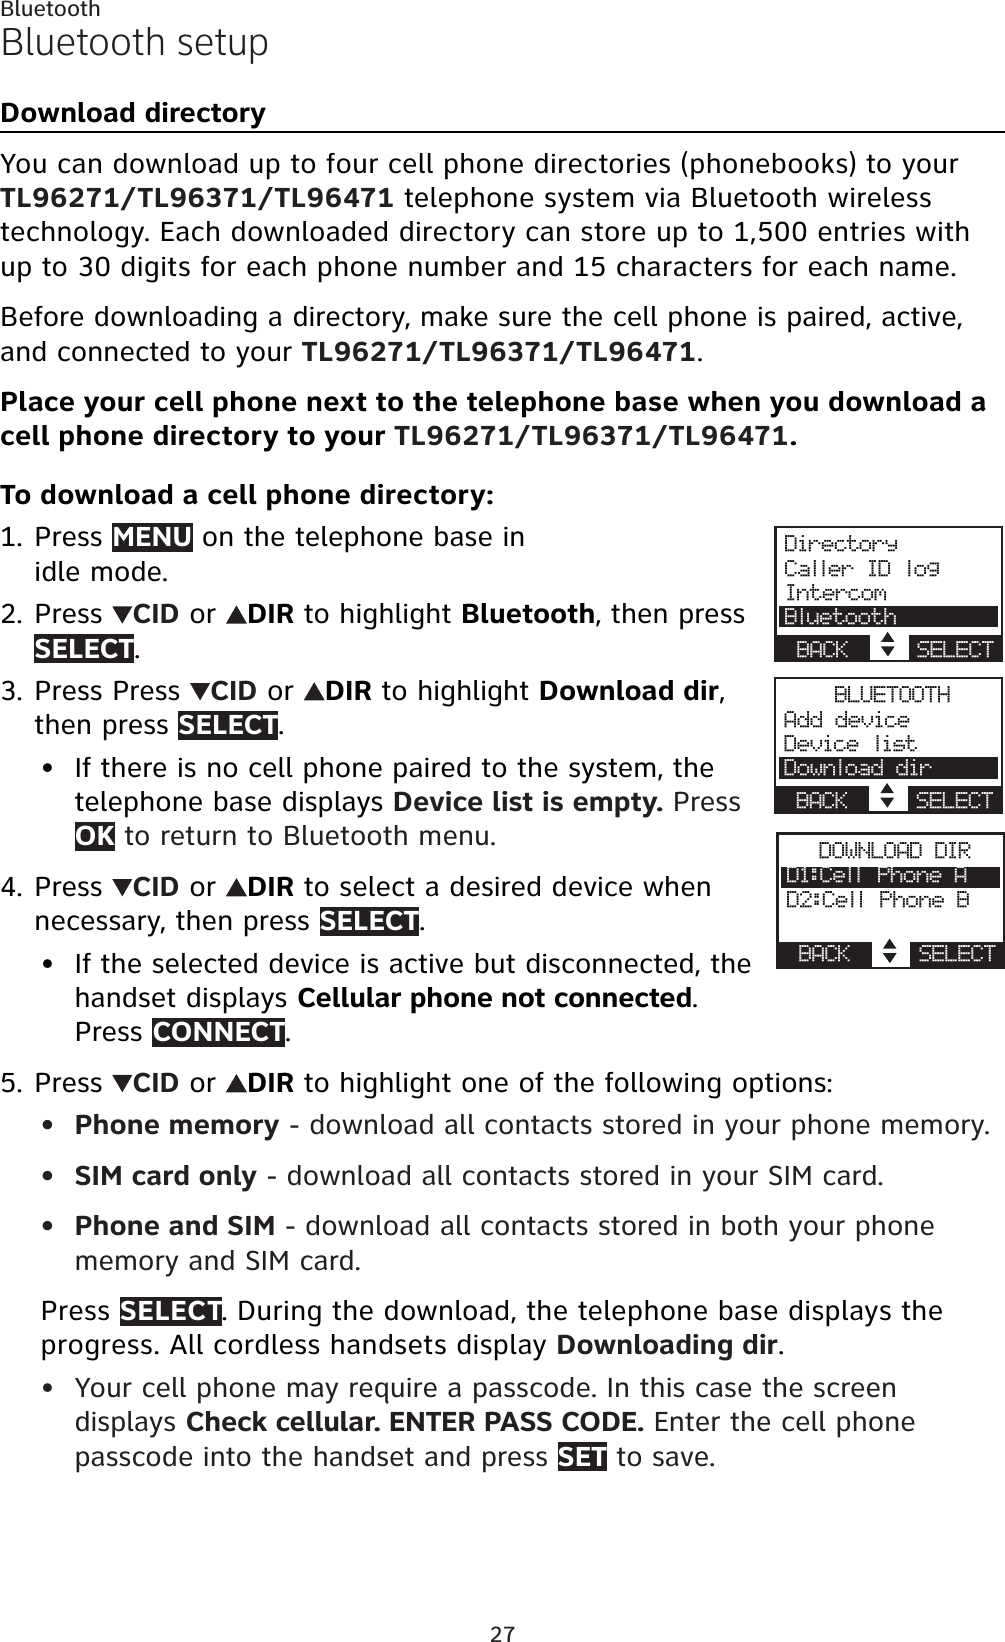 27BluetoothBluetooth setupDownload directoryYou can download up to four cell phone directories (phonebooks) to your TL96271/TL96371/TL96471 telephone system via Bluetooth wireless technology. Each downloaded directory can store up to 1,500 entries with up to 30 digits for each phone number and 15 characters for each name.Before downloading a directory, make sure the cell phone is paired, active, and connected to your TL96271/TL96371/TL96471.Place your cell phone next to the telephone base when you download a cell phone directory to your TL96271/TL96371/TL96471.To download a cell phone directory:Press MENU on the telephone base in idle mode.Press  CID or  DIRto highlight Bluetooth, then pressSELECT.Press Press  CID or  DIRto highlight Download dir,then press SELECT.If there is no cell phone paired to the system, the telephone base displays Device list is empty. Press OK to return to Bluetooth menu.Press  CID or  DIRto select a desired device when necessary, then press SELECT.If the selected device is active but disconnected, the handset displays Cellular phone not connected.Press CONNECT.Press  CID or  DIRto highlight one of the following options:Phone memory - download all contacts stored in your phone memory.SIM card only - download all contacts stored in your SIM card.Phone and SIM - download all contacts stored in both your phone memory and SIM card.Press SELECT. During the download, the telephone base displays the progress. All cordless handsets display Downloading dir.Your cell phone may require a passcode. In this case the screen displays Check cellular. ENTER PASS CODE. Enter the cell phone passcode into the handset and press SET to save.1.2.3.•4.•5.••••DirectoryCaller ID logIntercomBluetoothBACK    SELECTBLUETOOTHAdd deviceDevice listDownload dirBACK    SELECTDOWNLOAD DIRD1:Cell Phone AD2:Cell Phone BBACK    SELECT